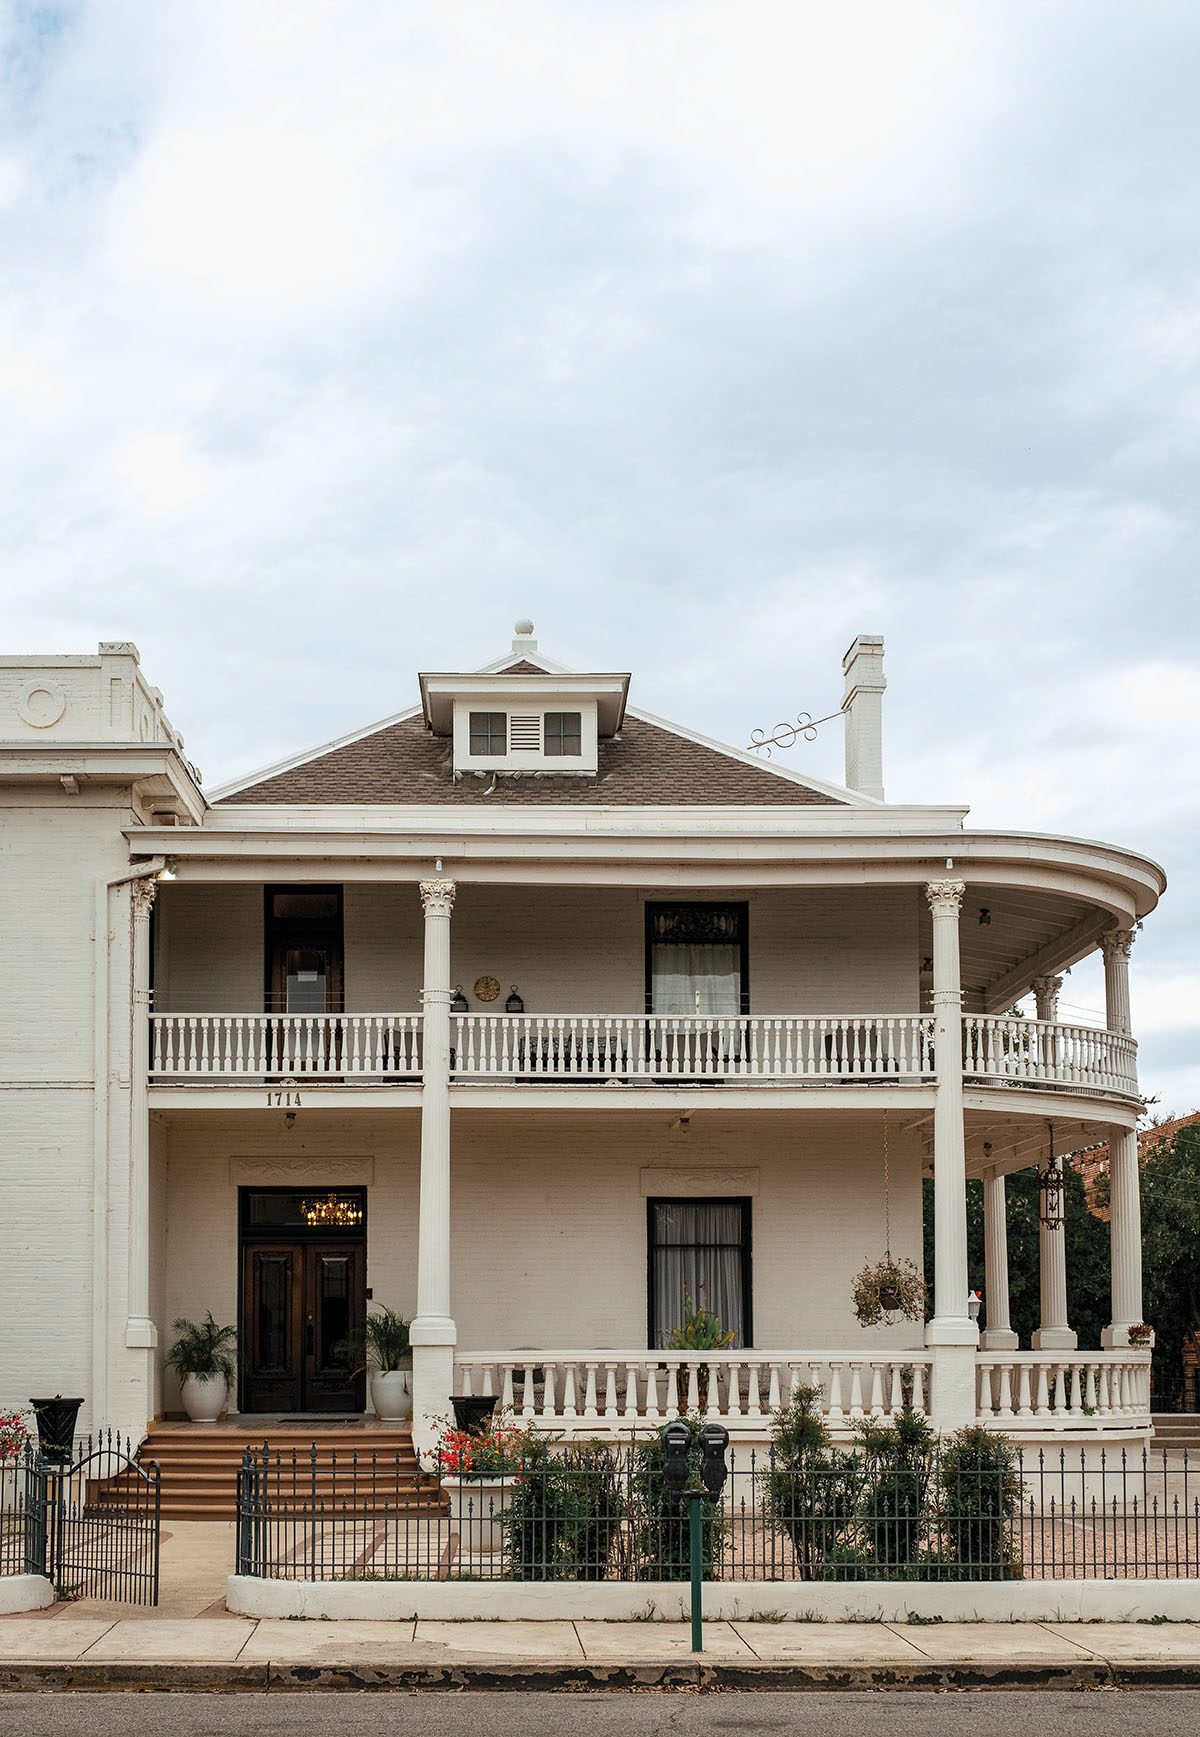 The exterior of a large mansion with a wraparound porch and white paint job